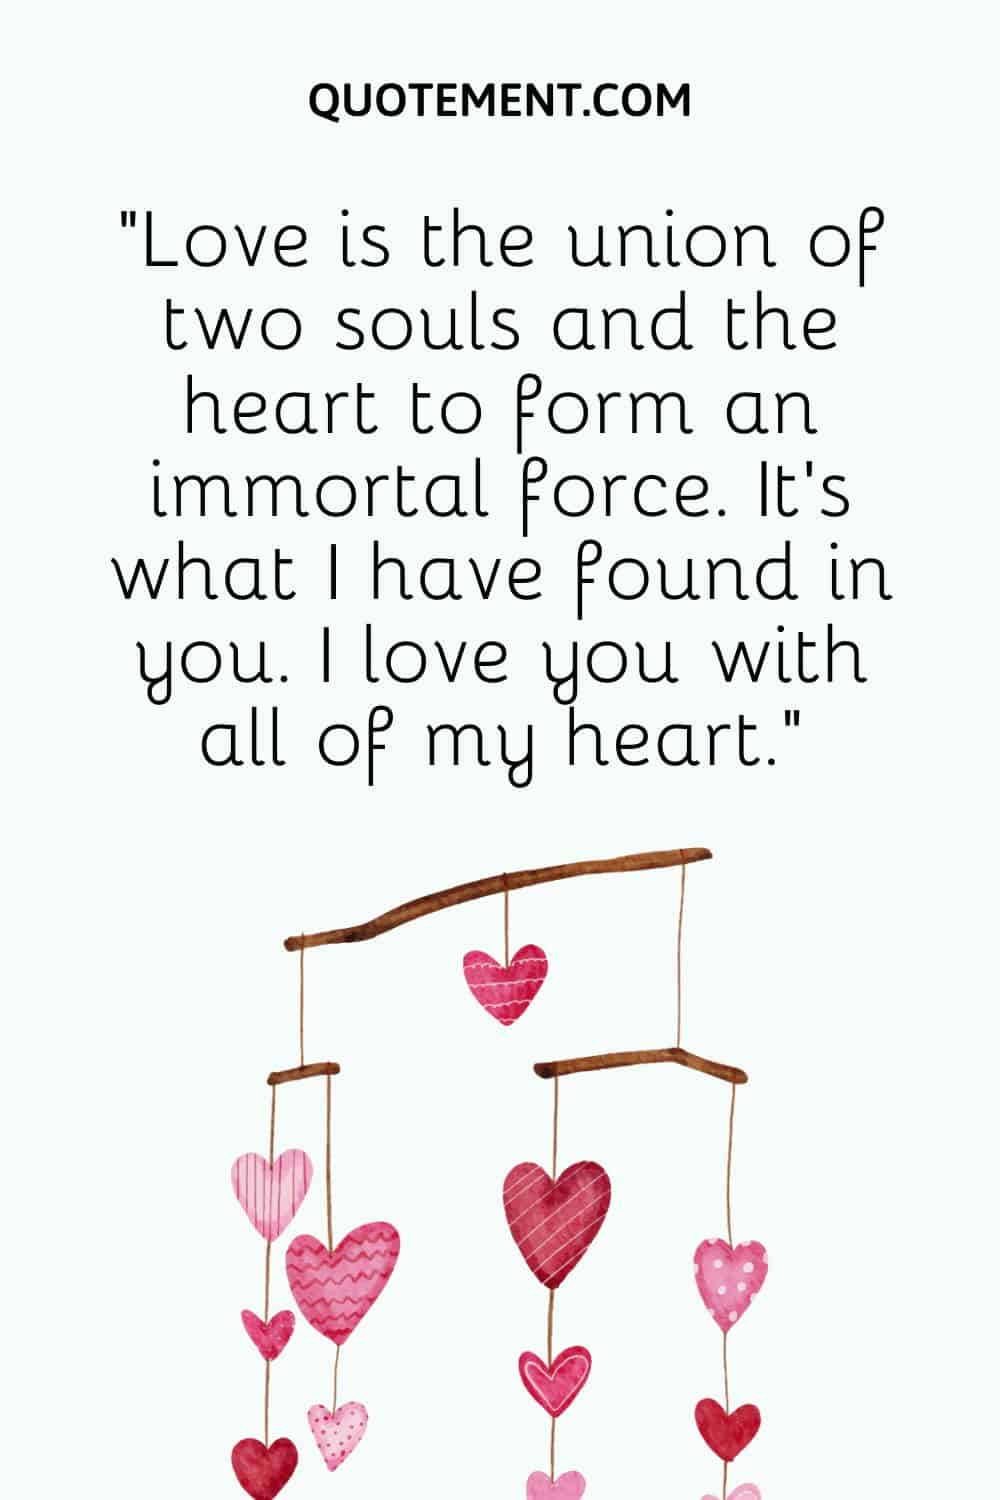 Love is the union of two souls and the heart to form an immortal force